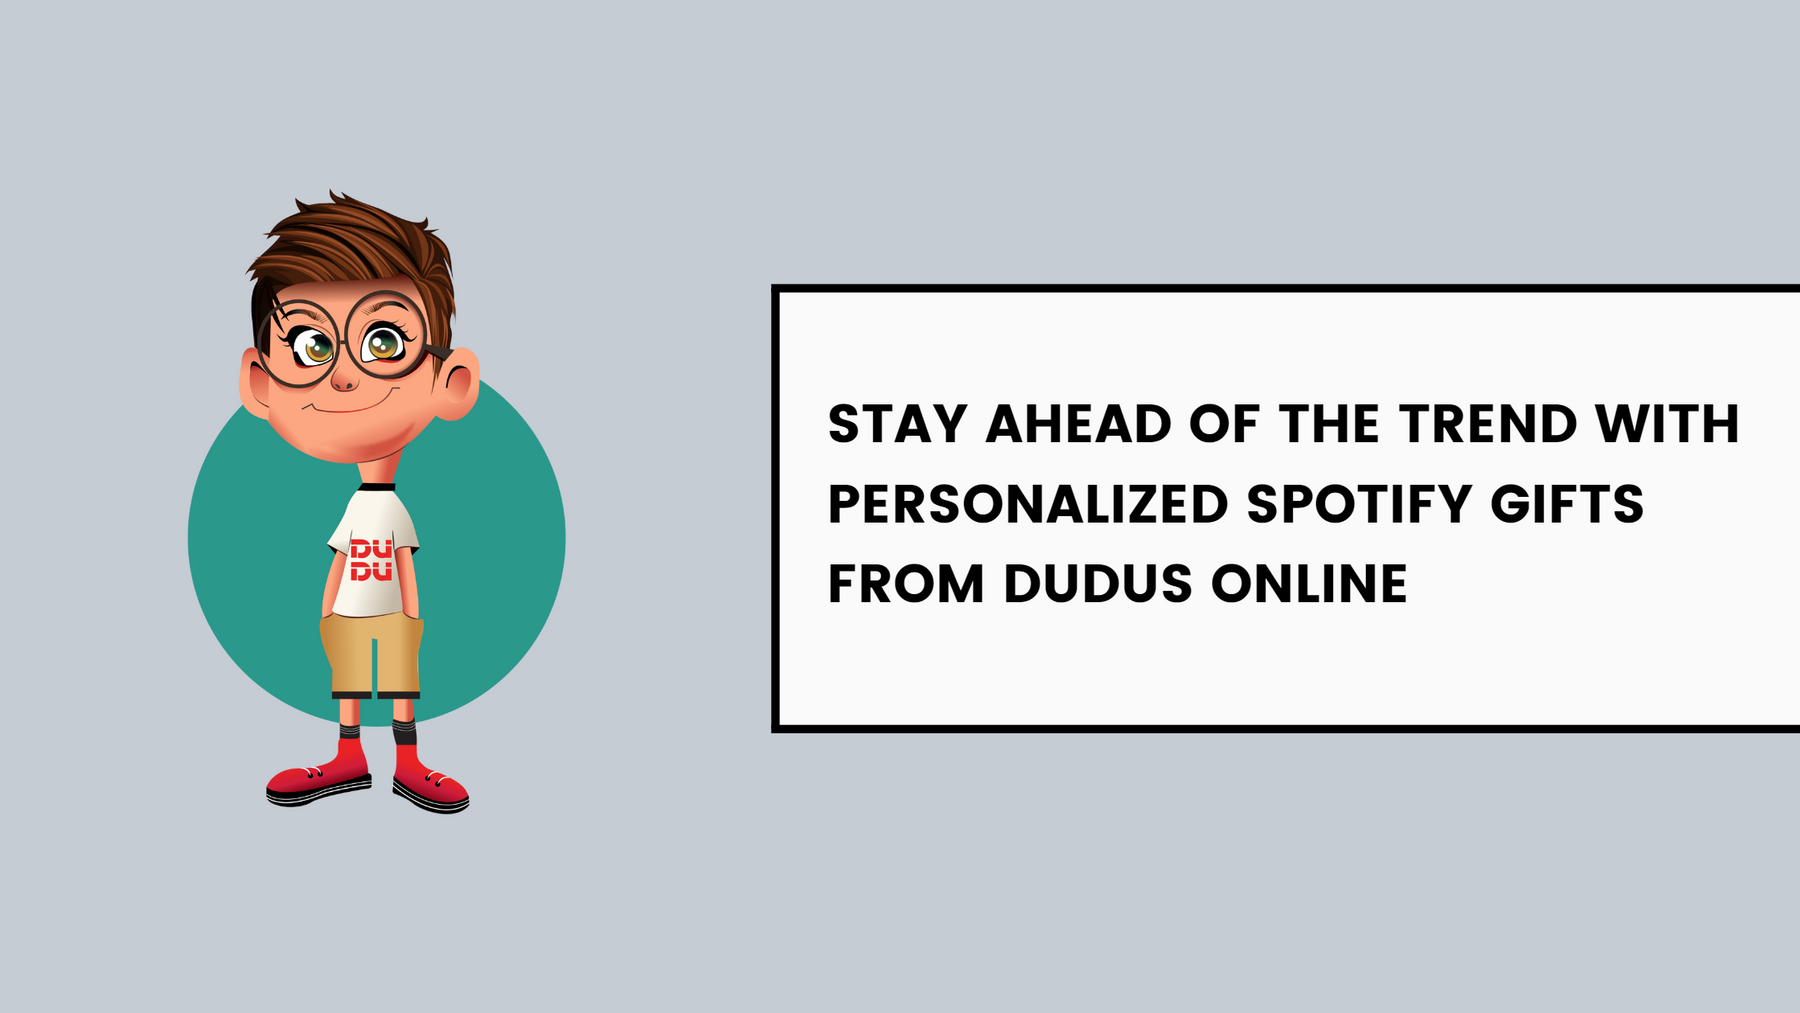 Stay Ahead Of The Trend With Personalized Spotify Gifts From Dudus Online